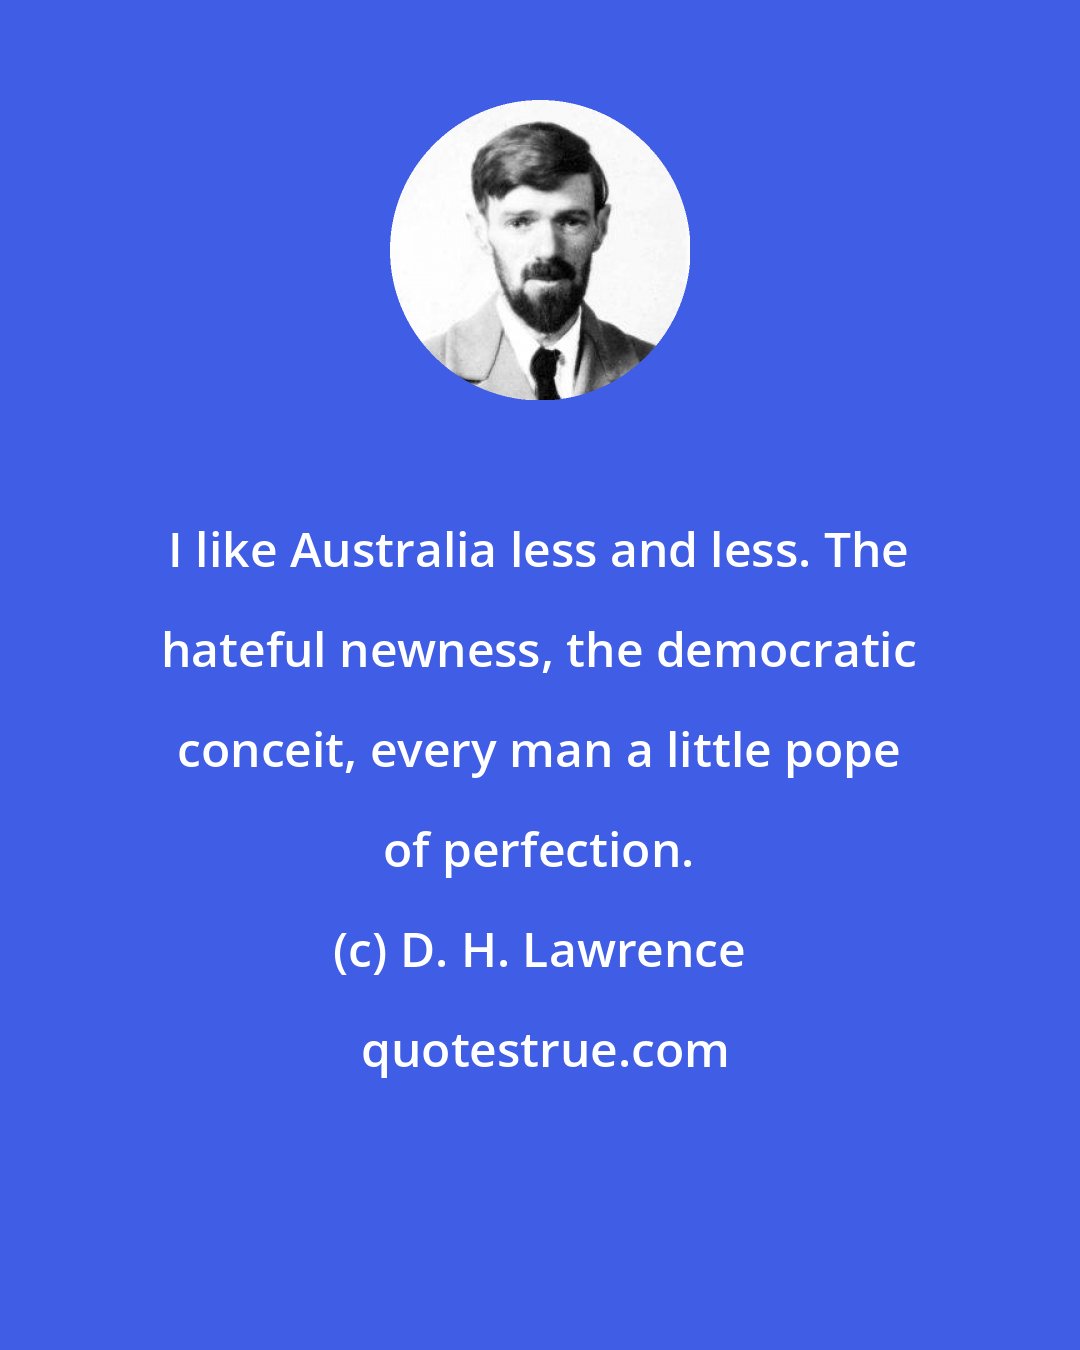 D. H. Lawrence: I like Australia less and less. The hateful newness, the democratic conceit, every man a little pope of perfection.